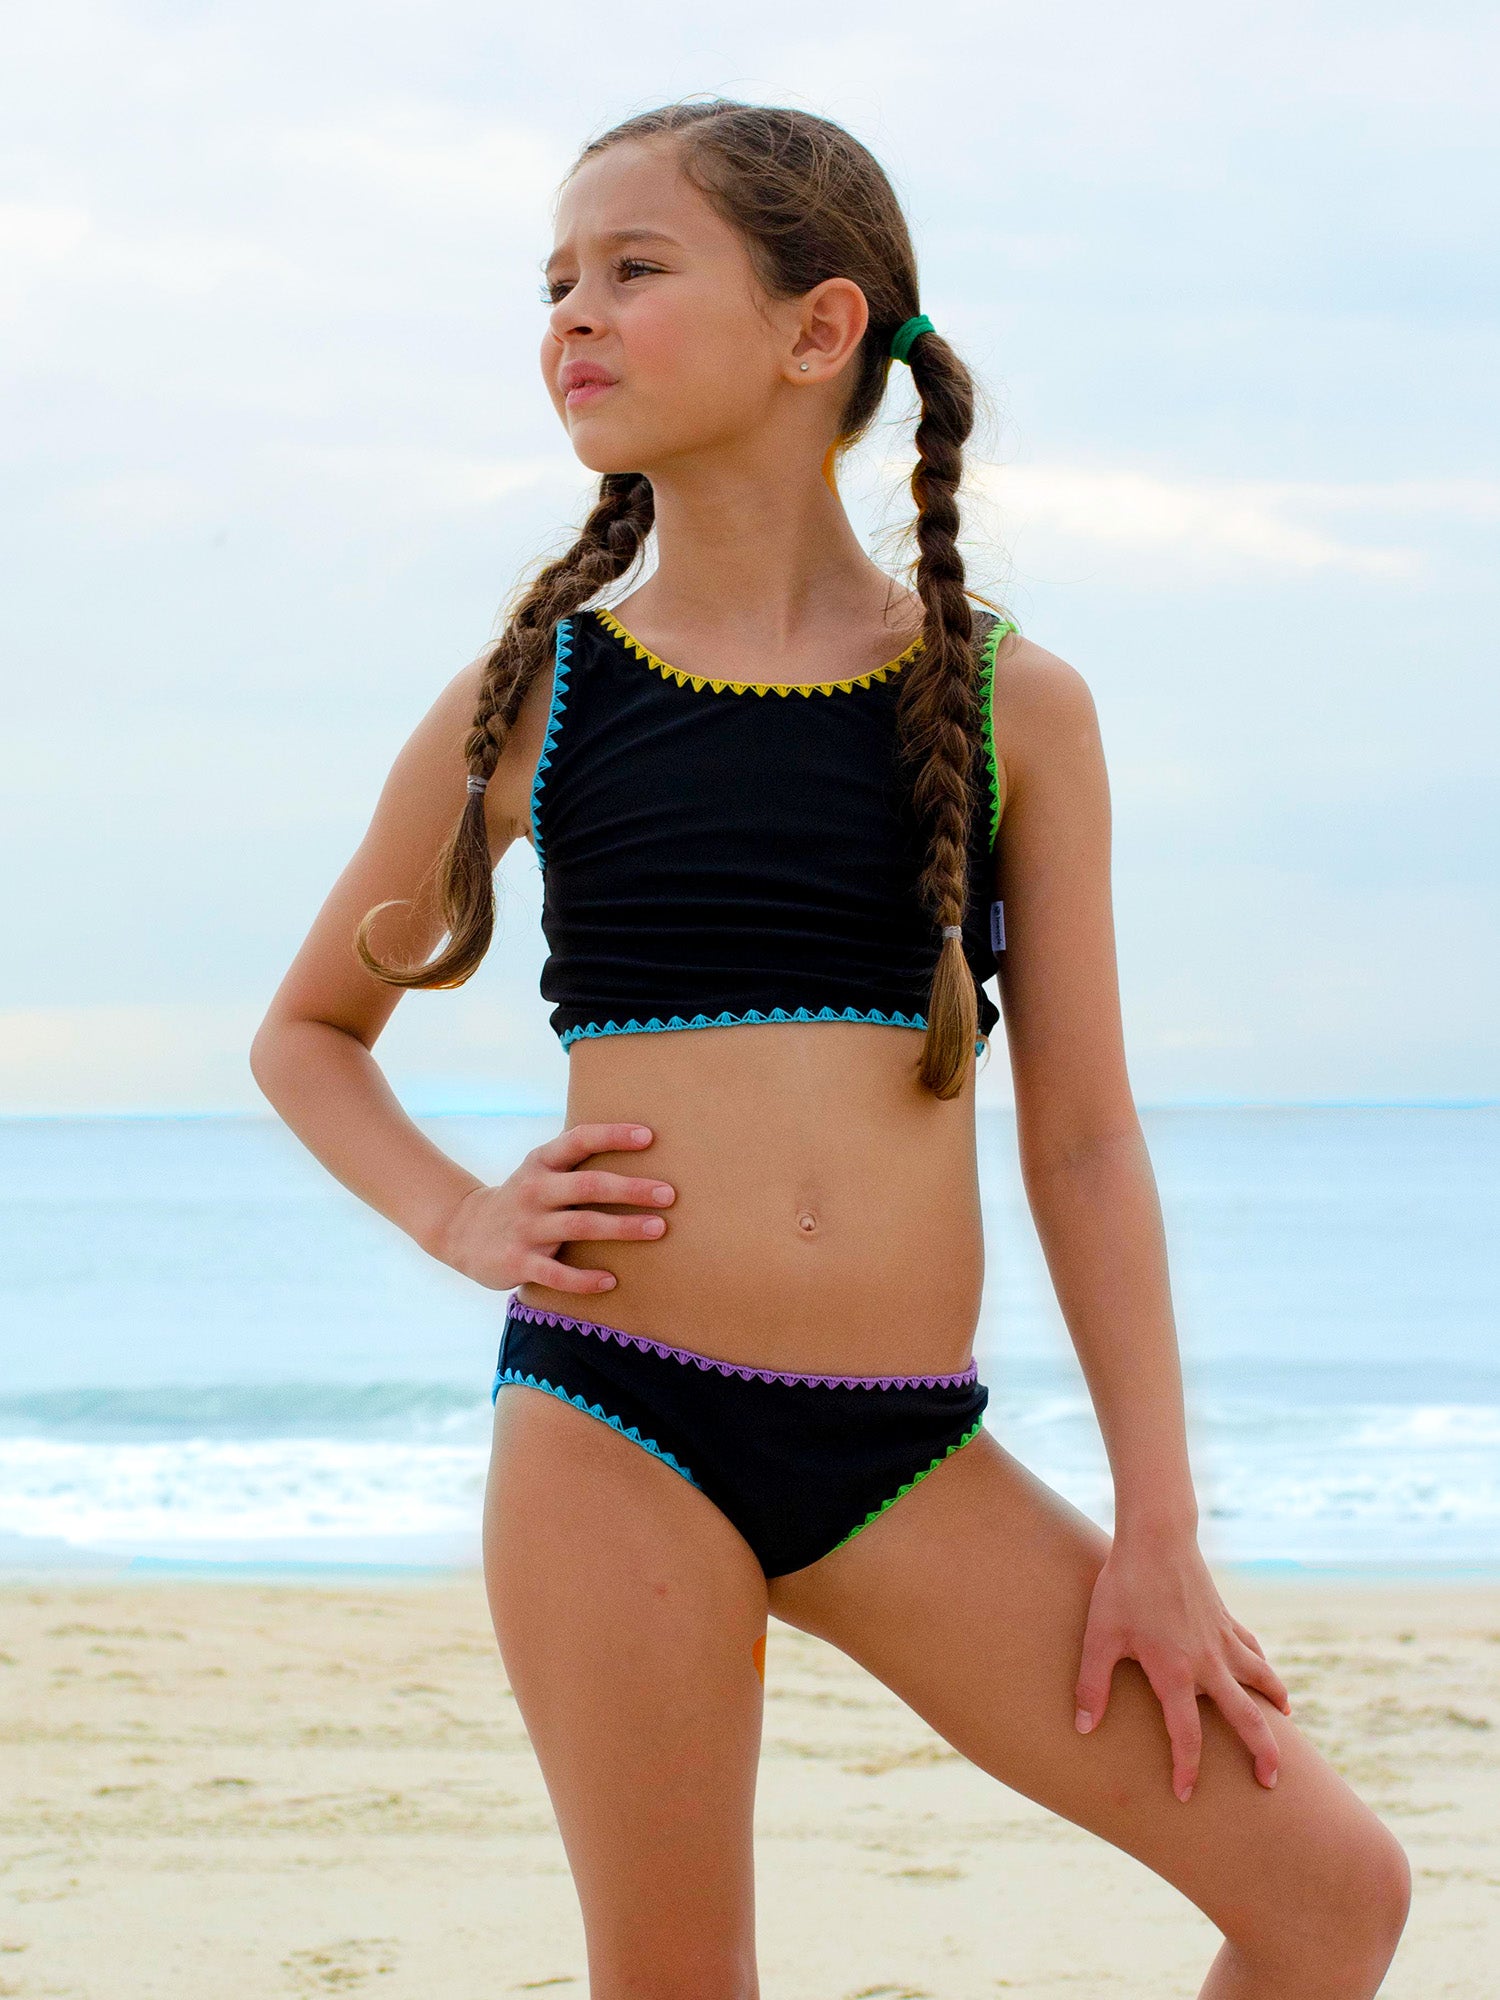 Textured Fabric Two Piece Swim Set with Embroideryroidery Trim Swimsuit (BLAKE)